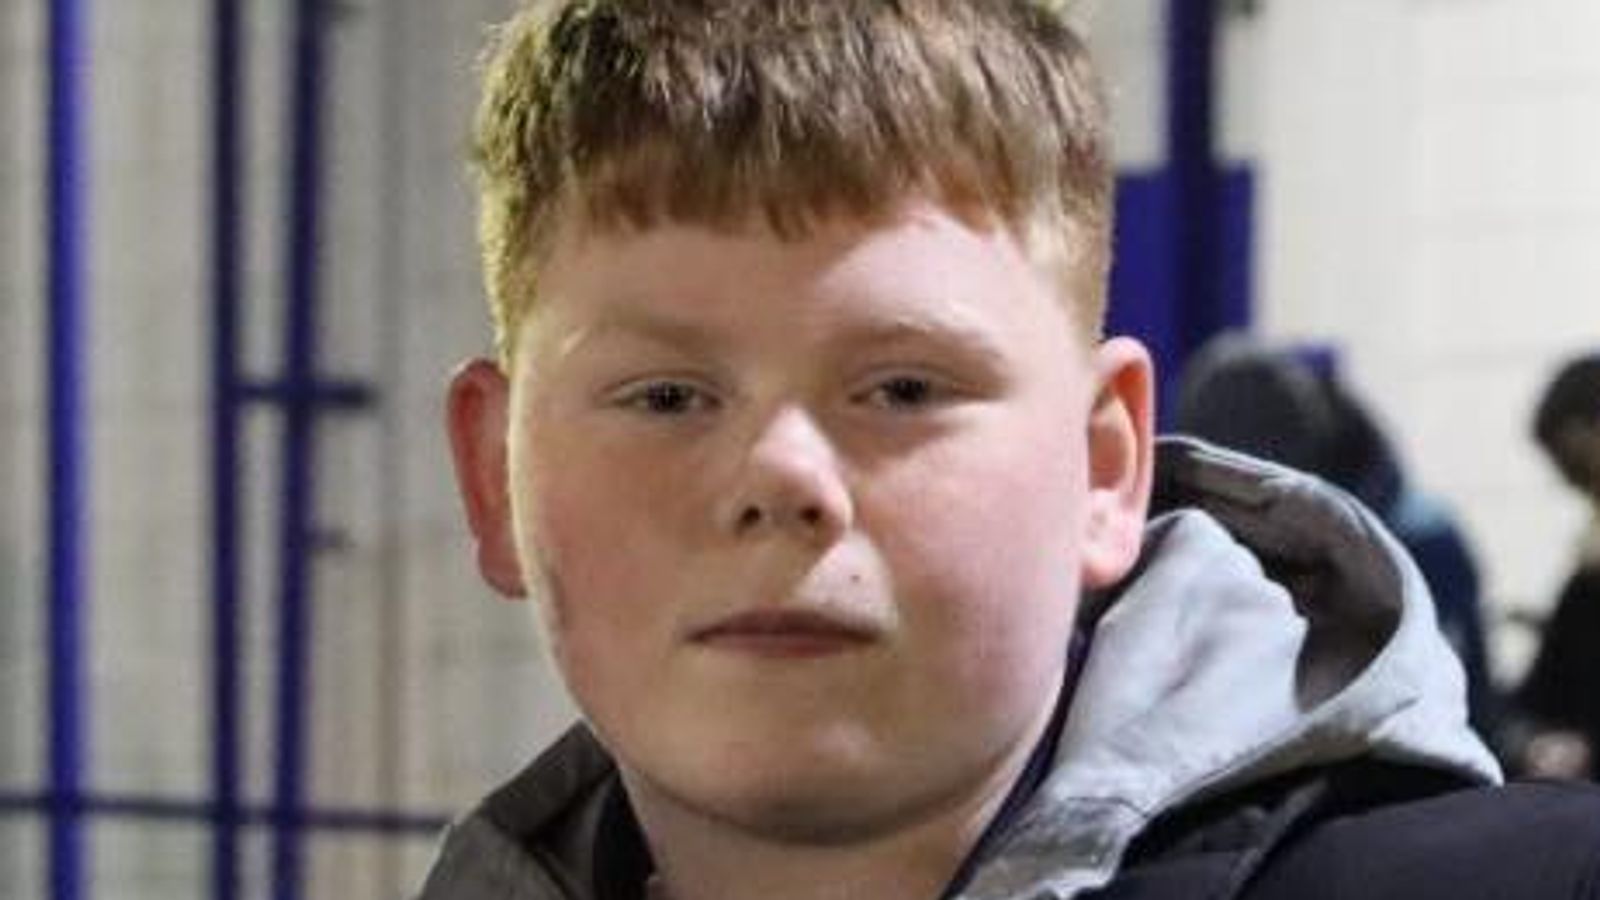 Leeds stabbing: Teenager charged with murder of 15-year-old Alfie Lewis